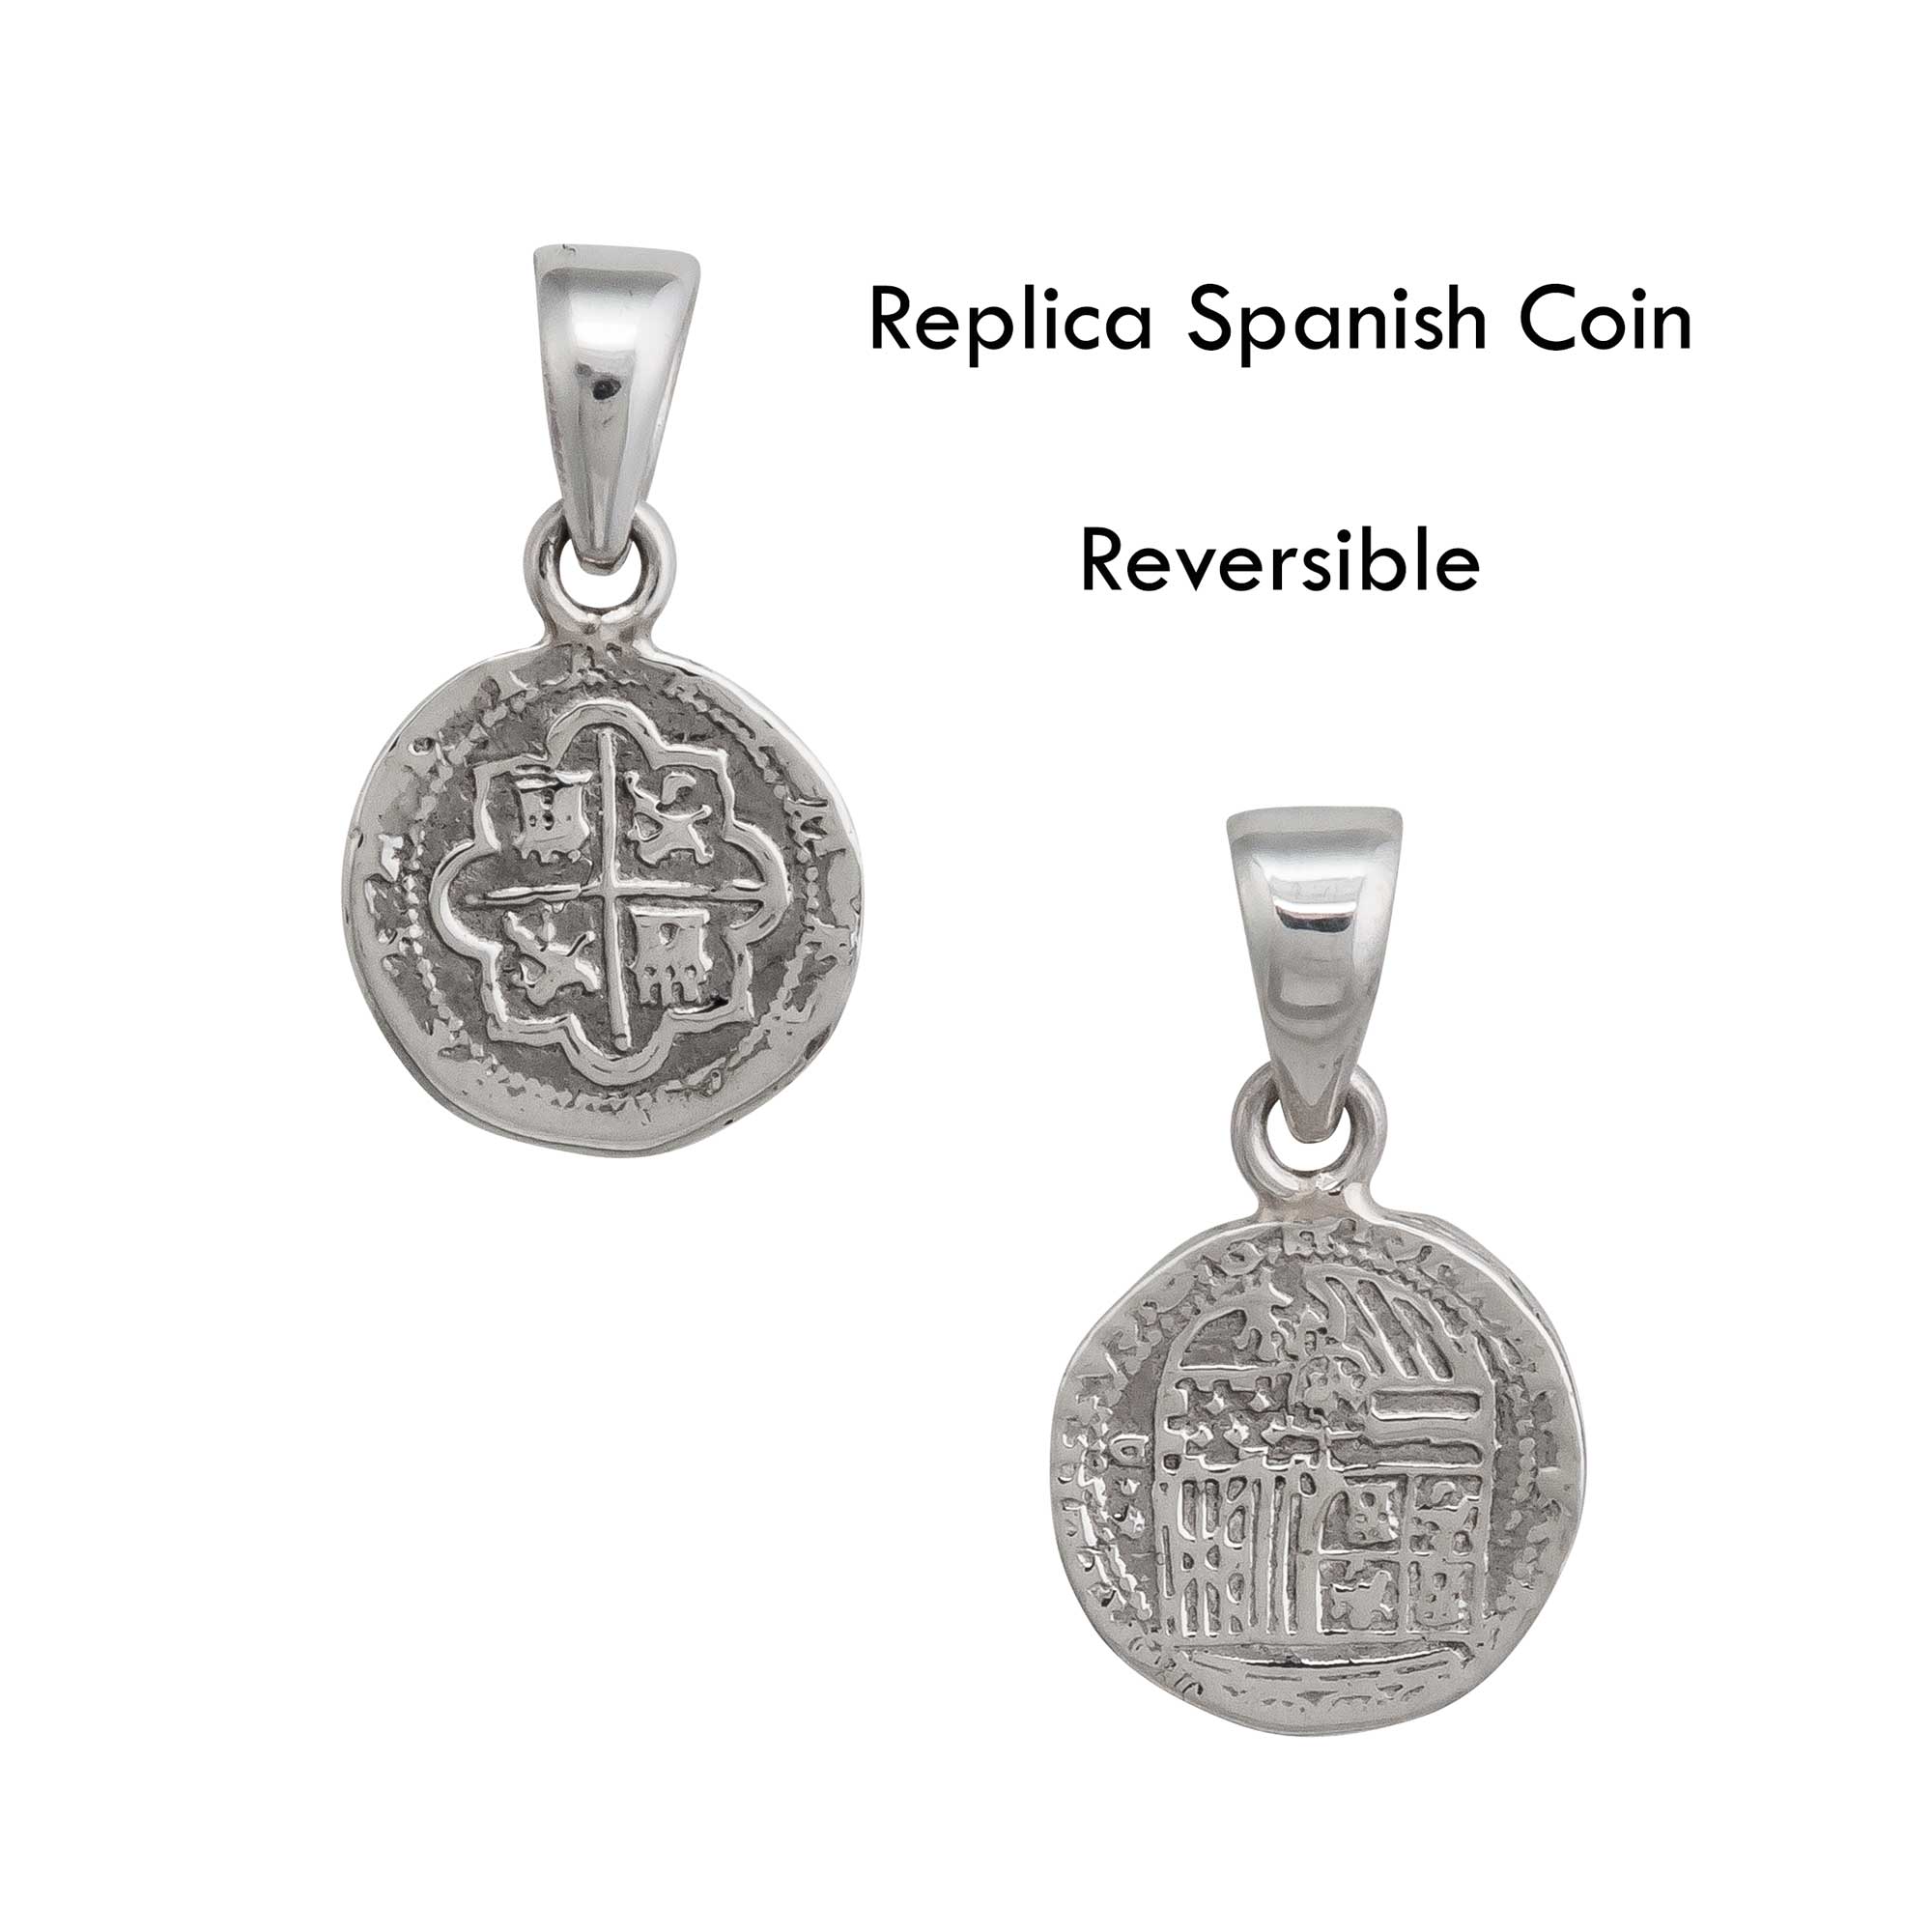 Spanish Gold Shipwreck Coin Jewelry - Pirate Gold Coins